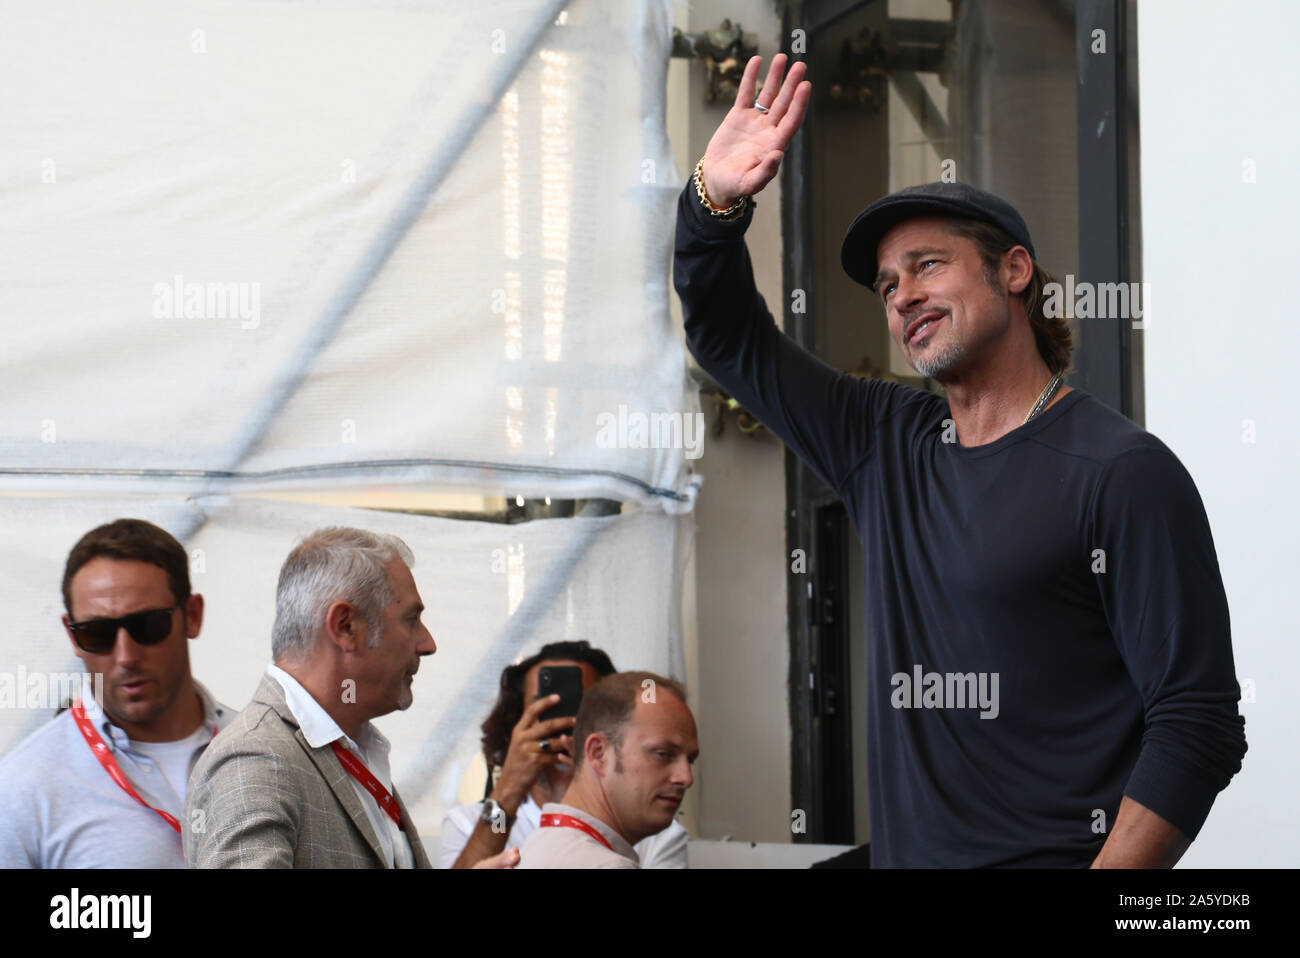 VENICE, ITALY - AUGUST 29,2019: Brad Pitt attends 'Ad Astra' photocall during the 76th Venice Film Festival on August 29, 2019 in Venice, Italy Stock Photo